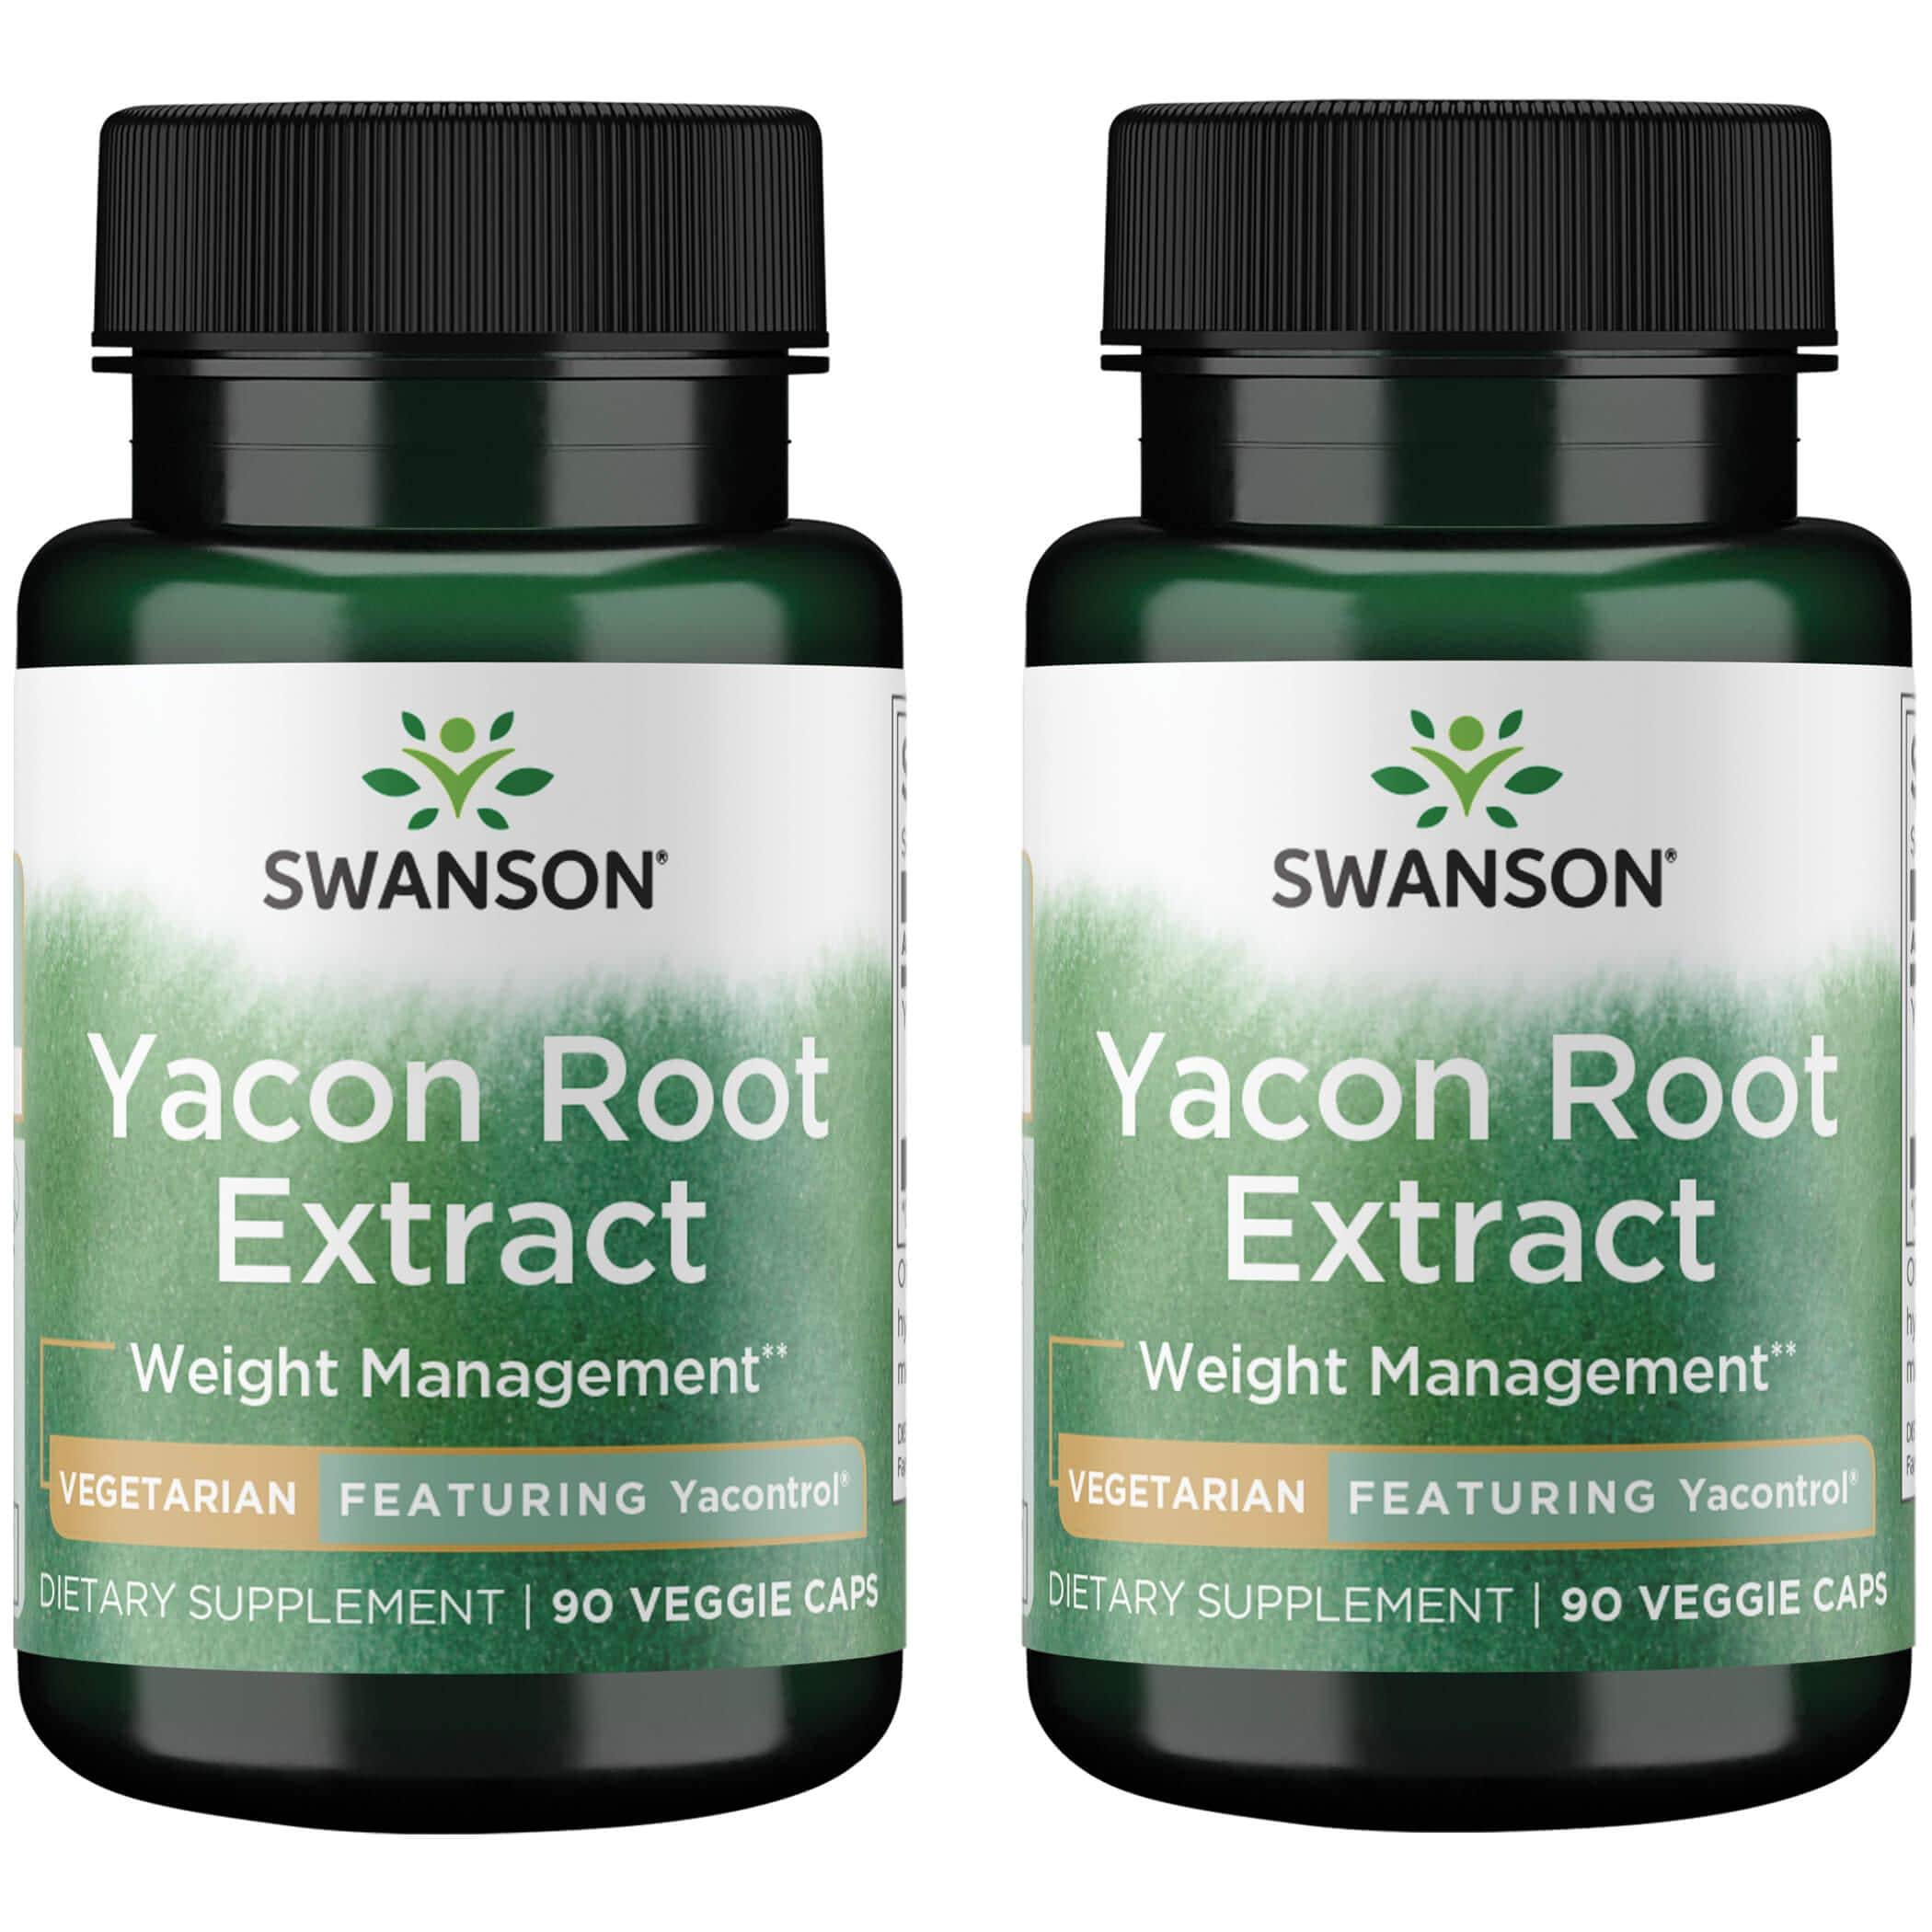 Swanson Best Weight-Control Formulas Yacon Root Extract - Featuring Yacontrol 2 Pack Vitamin 100 mg 90 Veg Caps Weight Control Weight Management